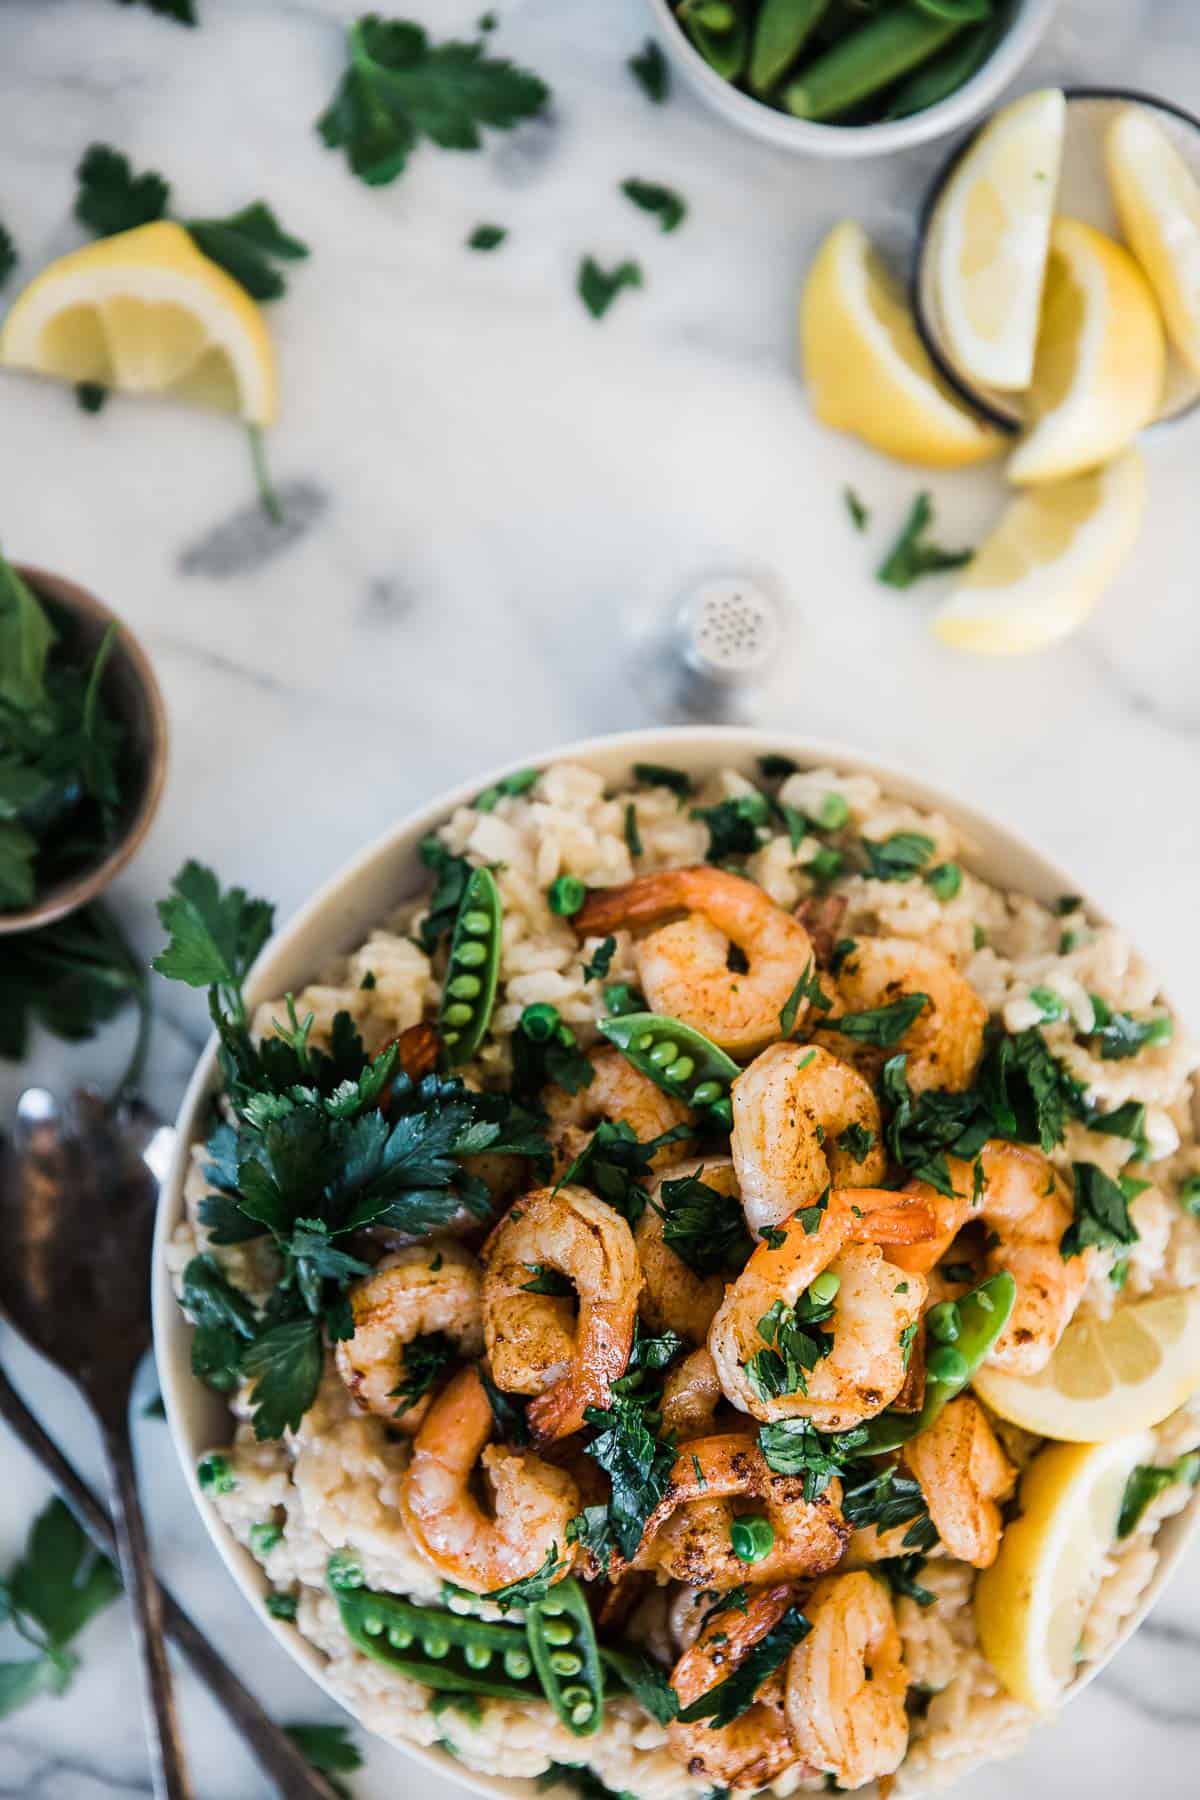 Shrimp risotto recipe in a white bowl atop a marble counter. There are lemons to the side.